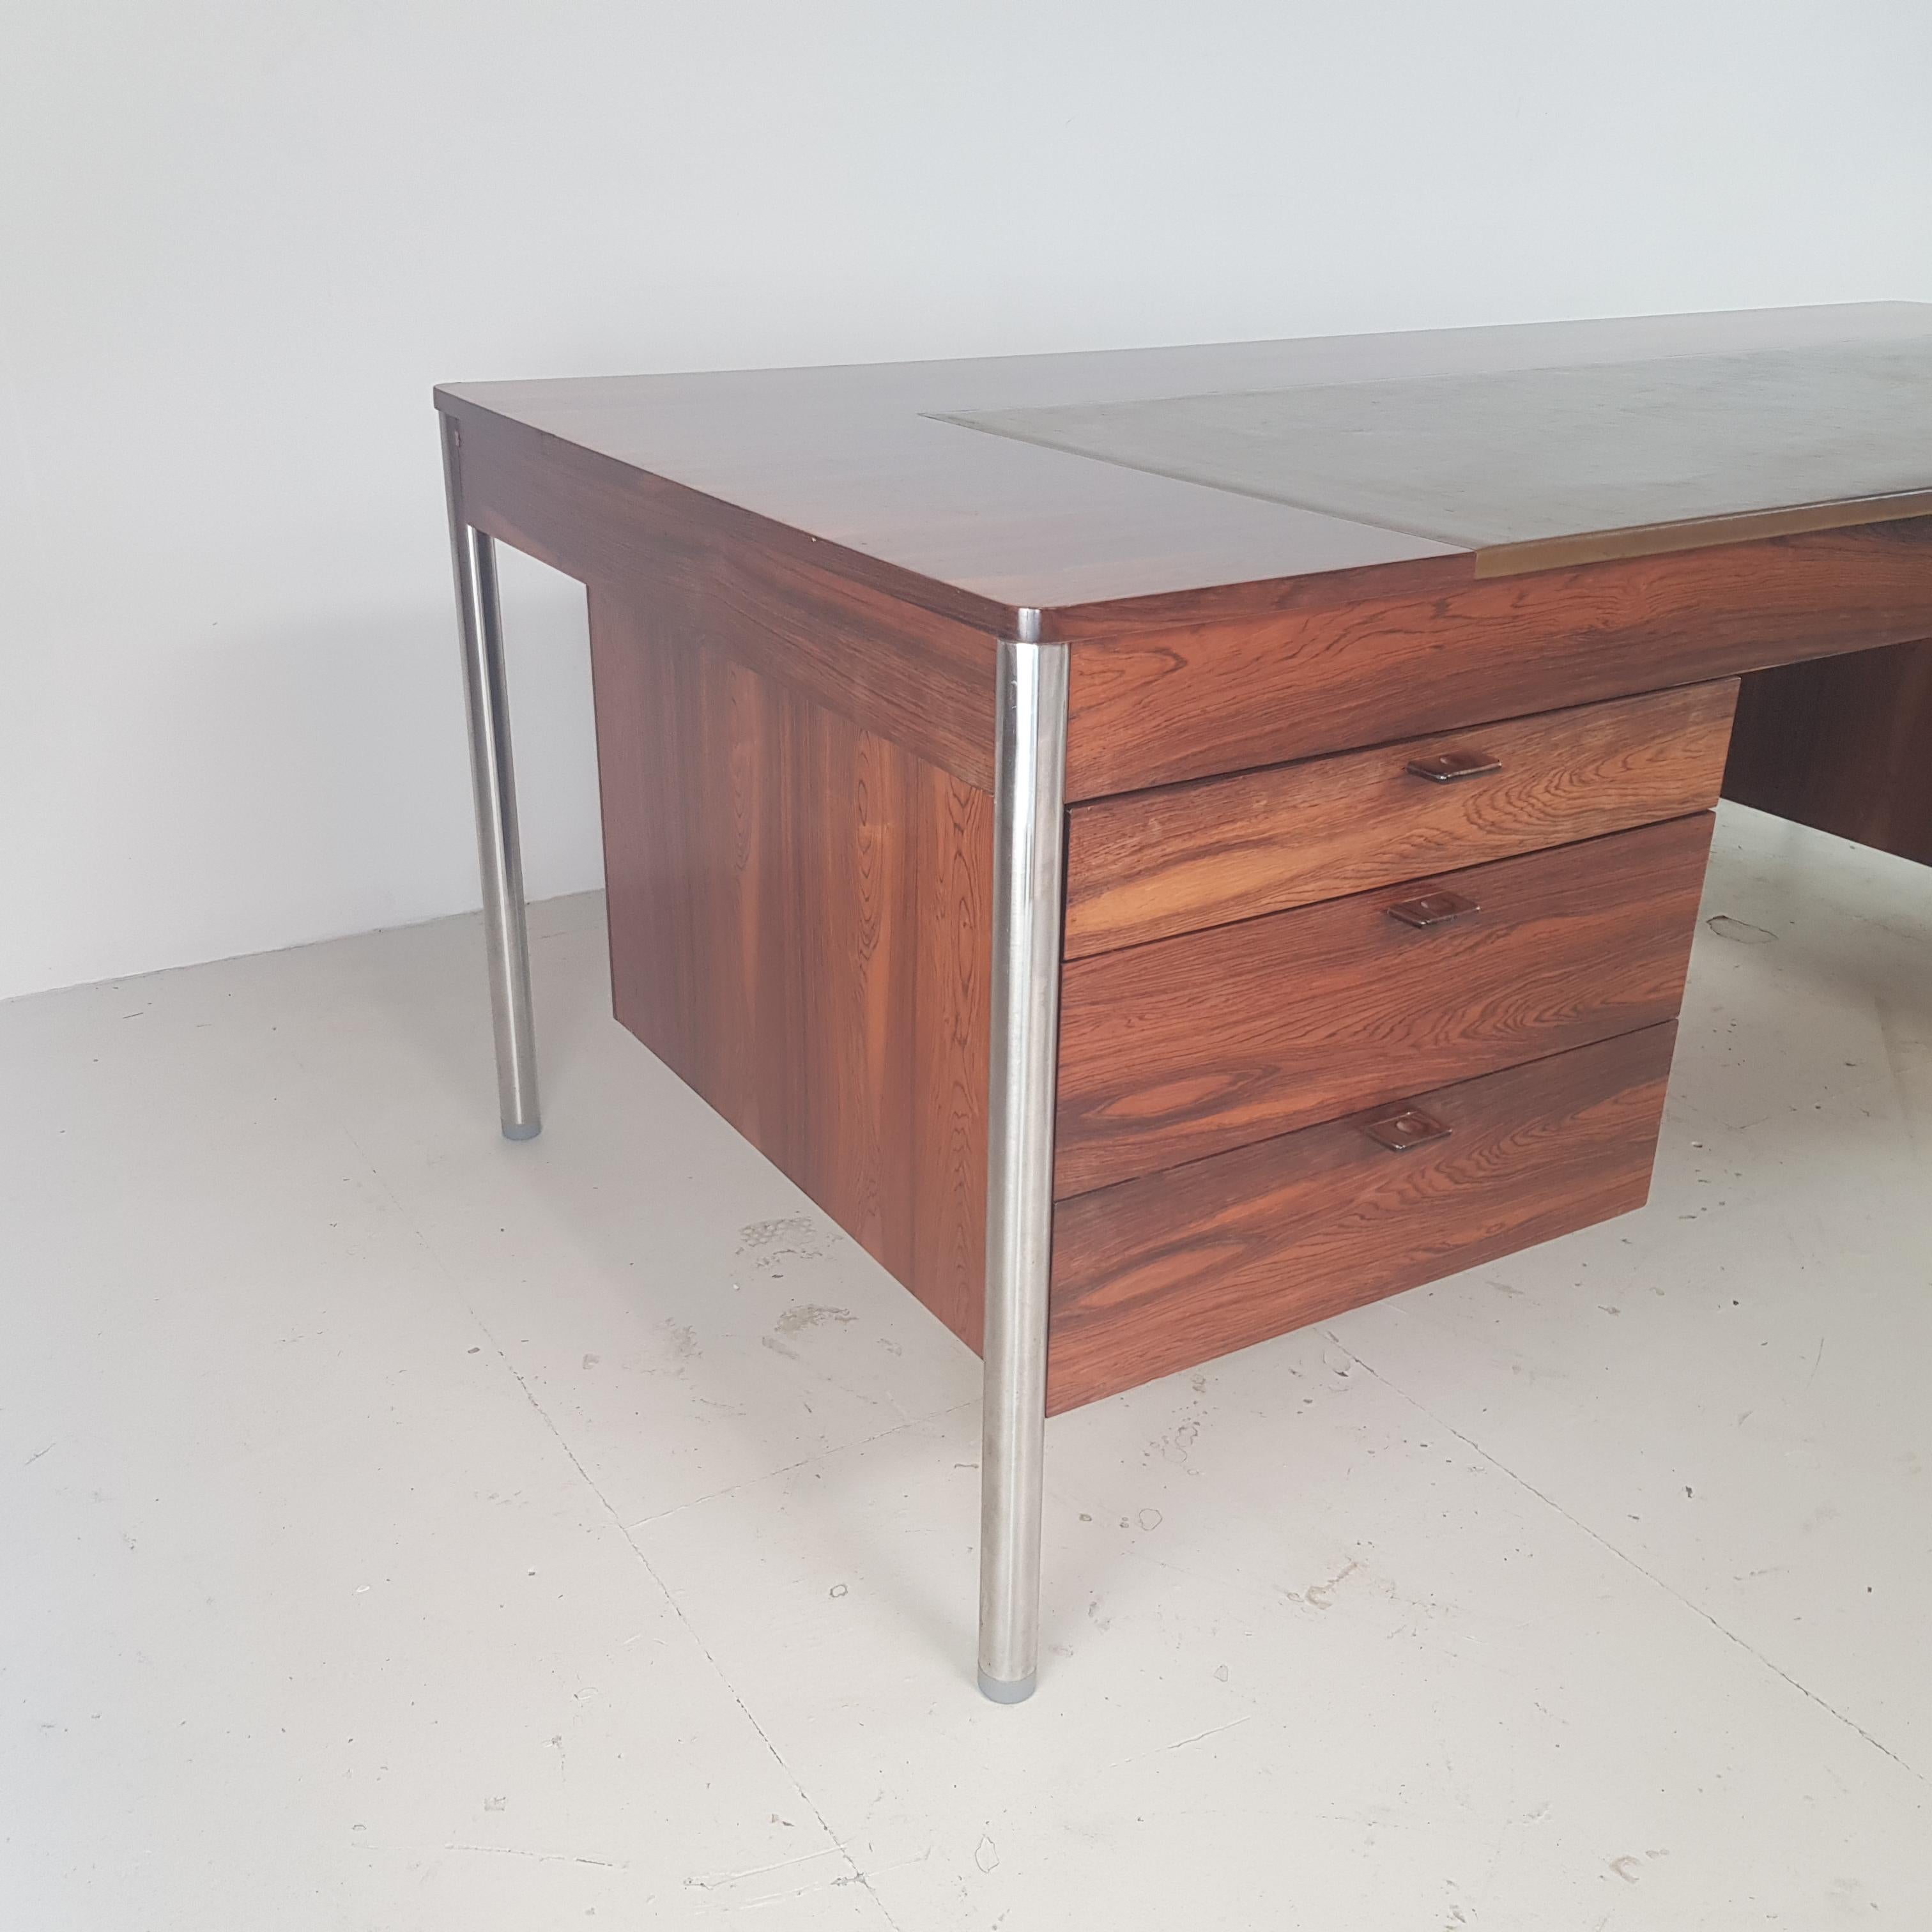 British 1960s Rosewood Desk by Robert Heritage for Archie Shine